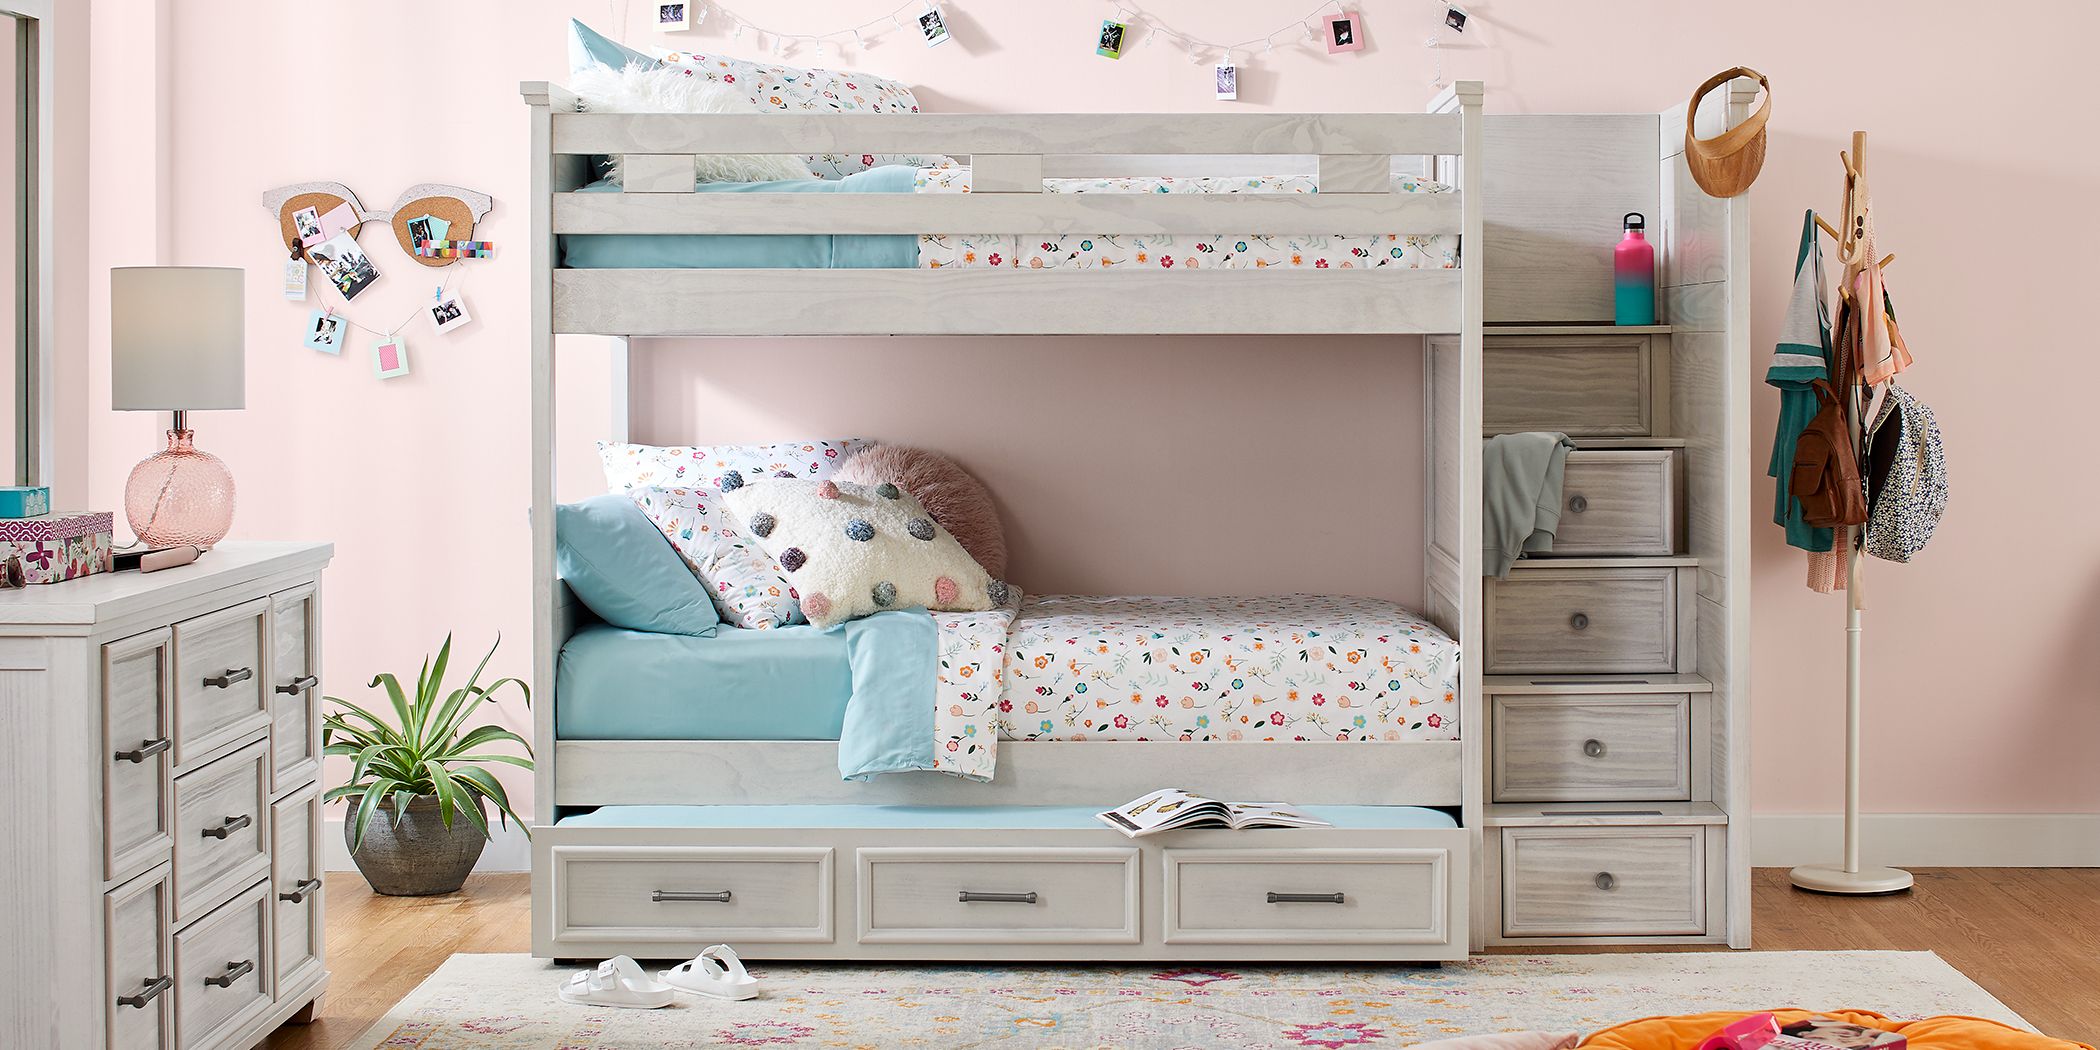 Bunk Beds With Storage Space, Childrens Bunk Beds With Storage